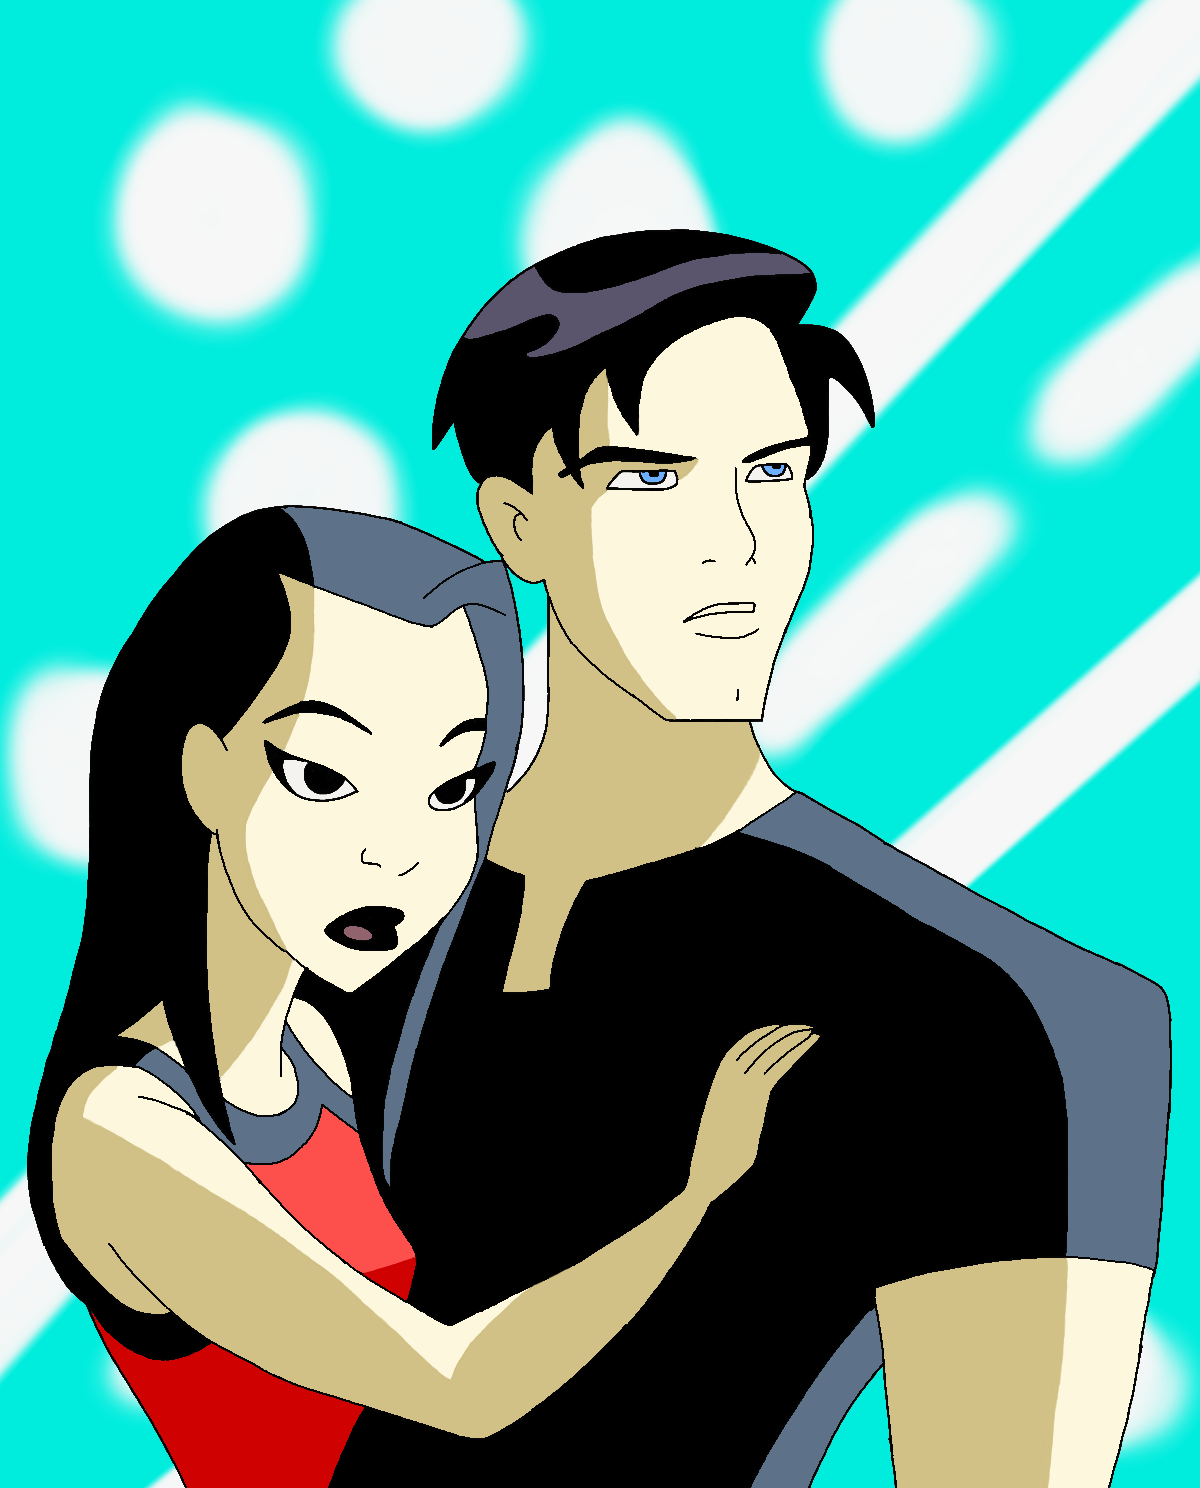 Batman Beyond: Terry and Dana Saw the Moment by CrawfordJenny on DeviantArt